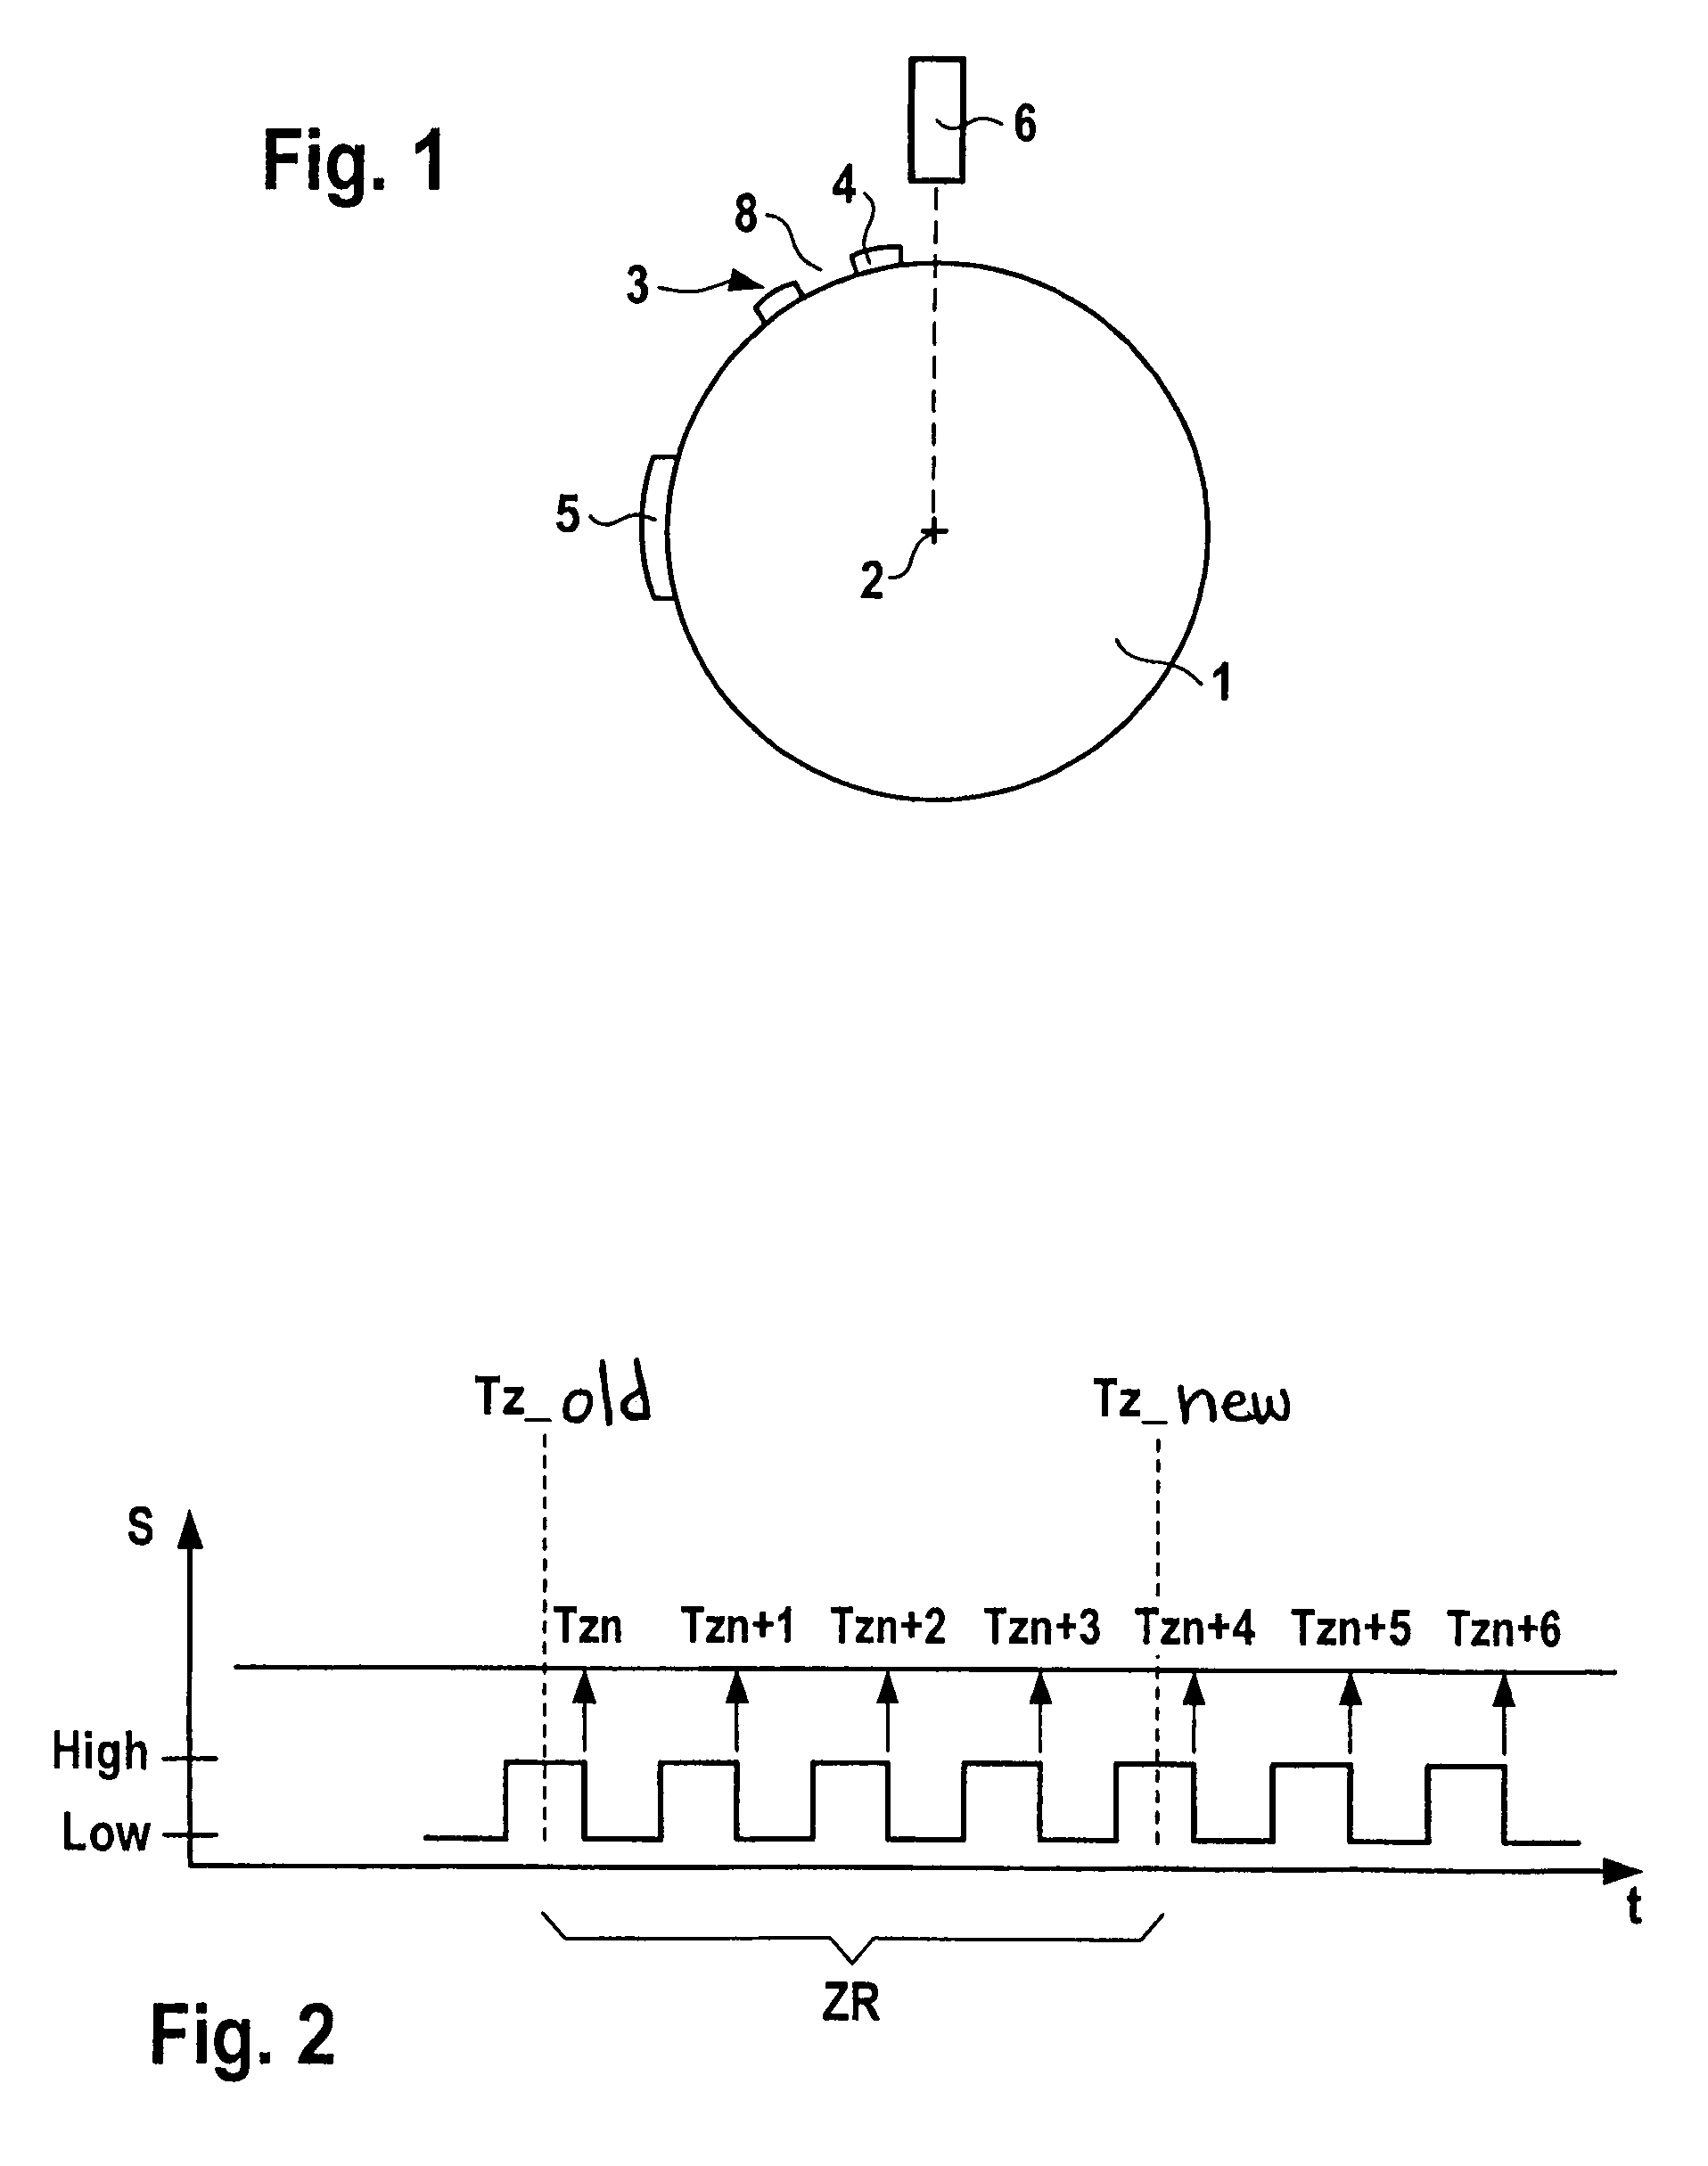 Method for measuring the rotational speed of a crankshaft